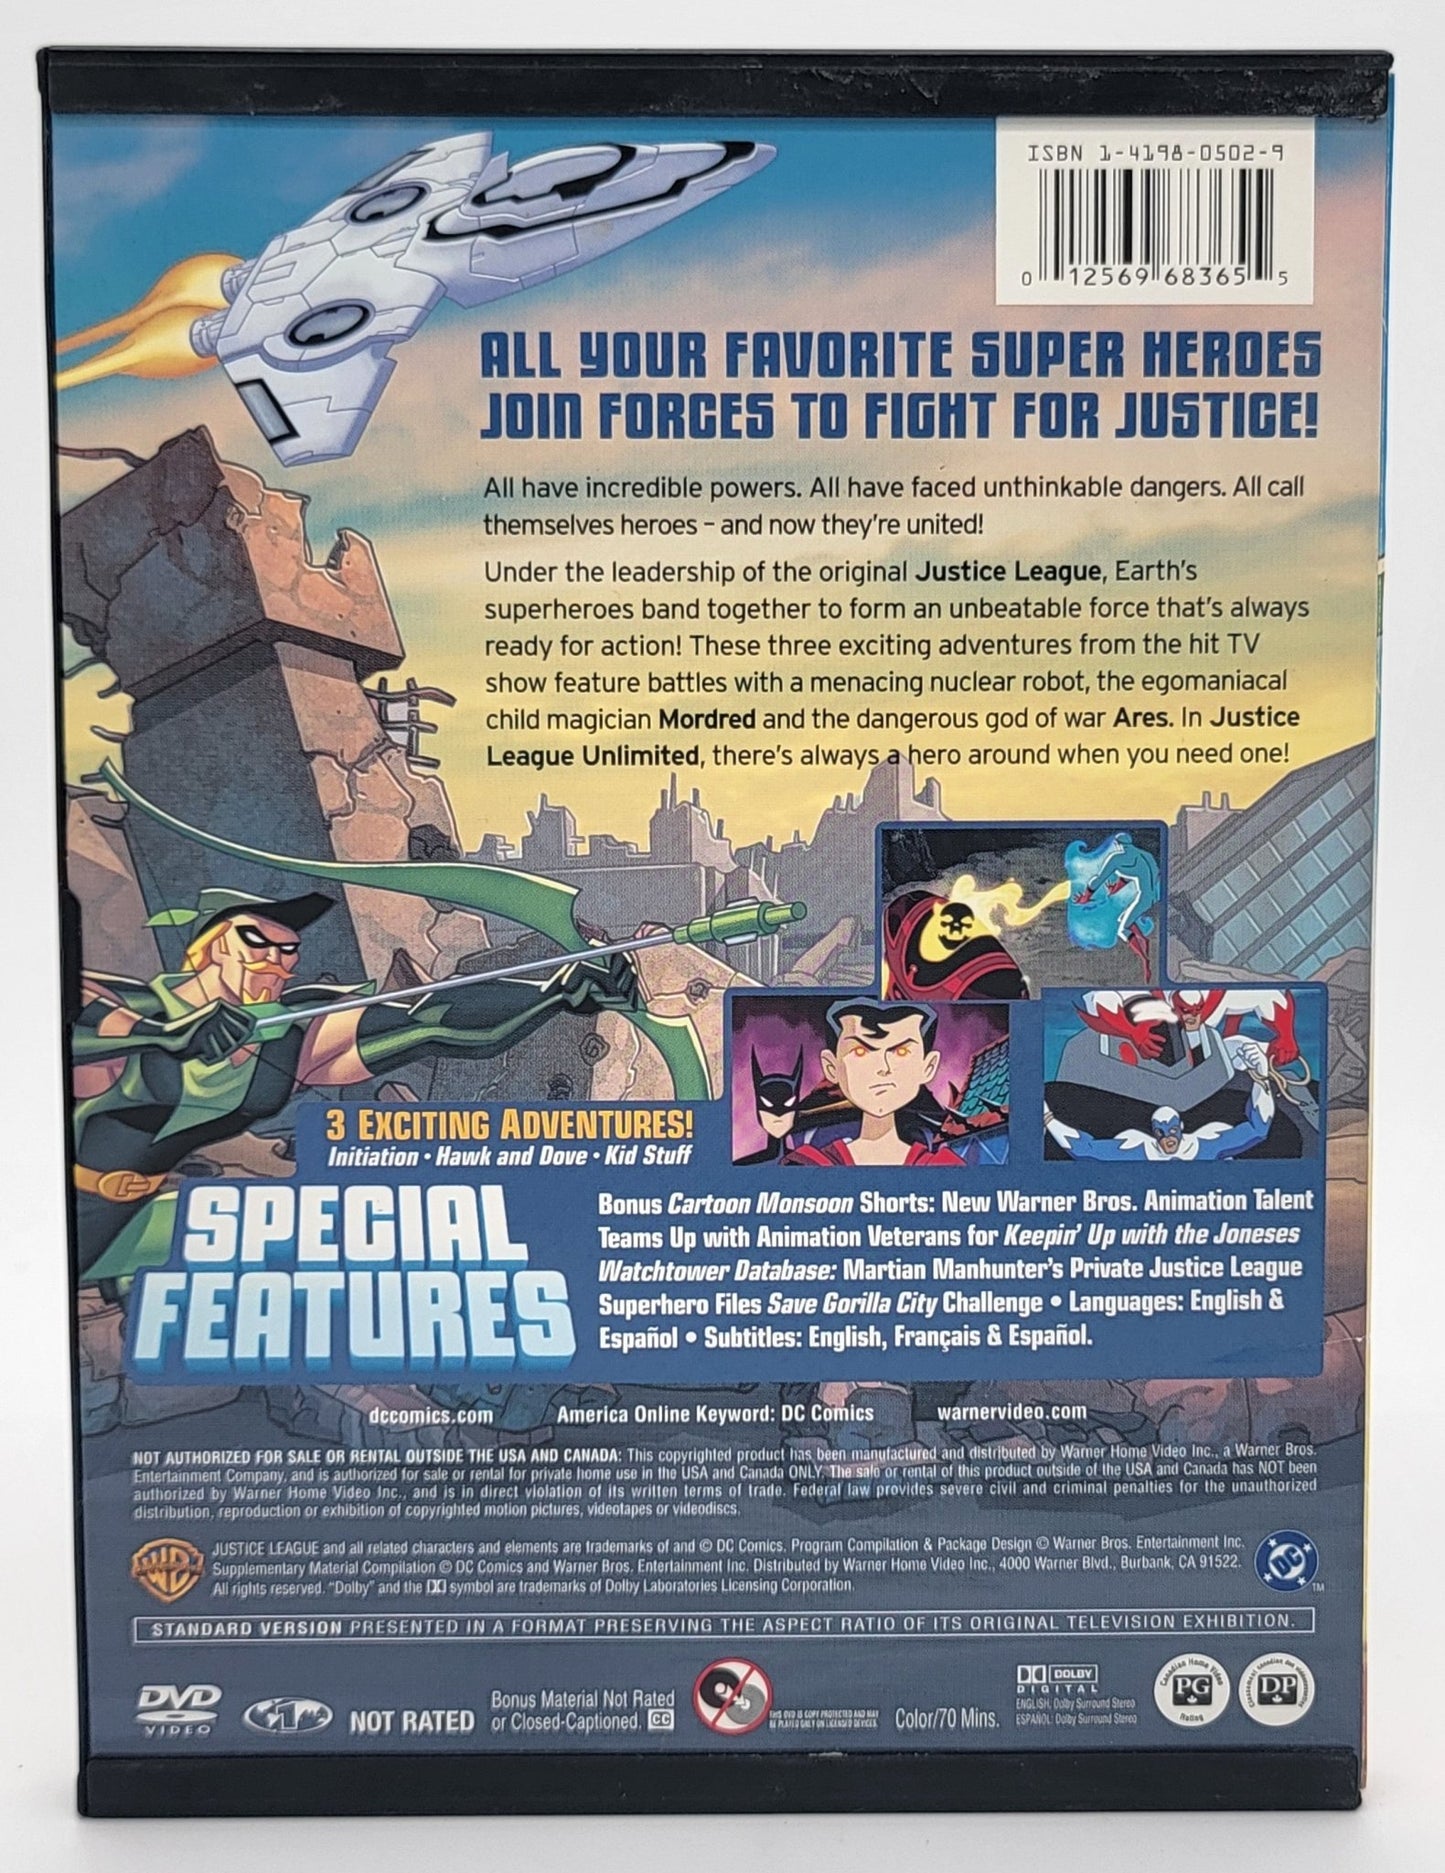 Warner Bothers - Justic League Unlimited - Saving the World | DVD | DC Comics Kids Collection - DVD - Steady Bunny Shop